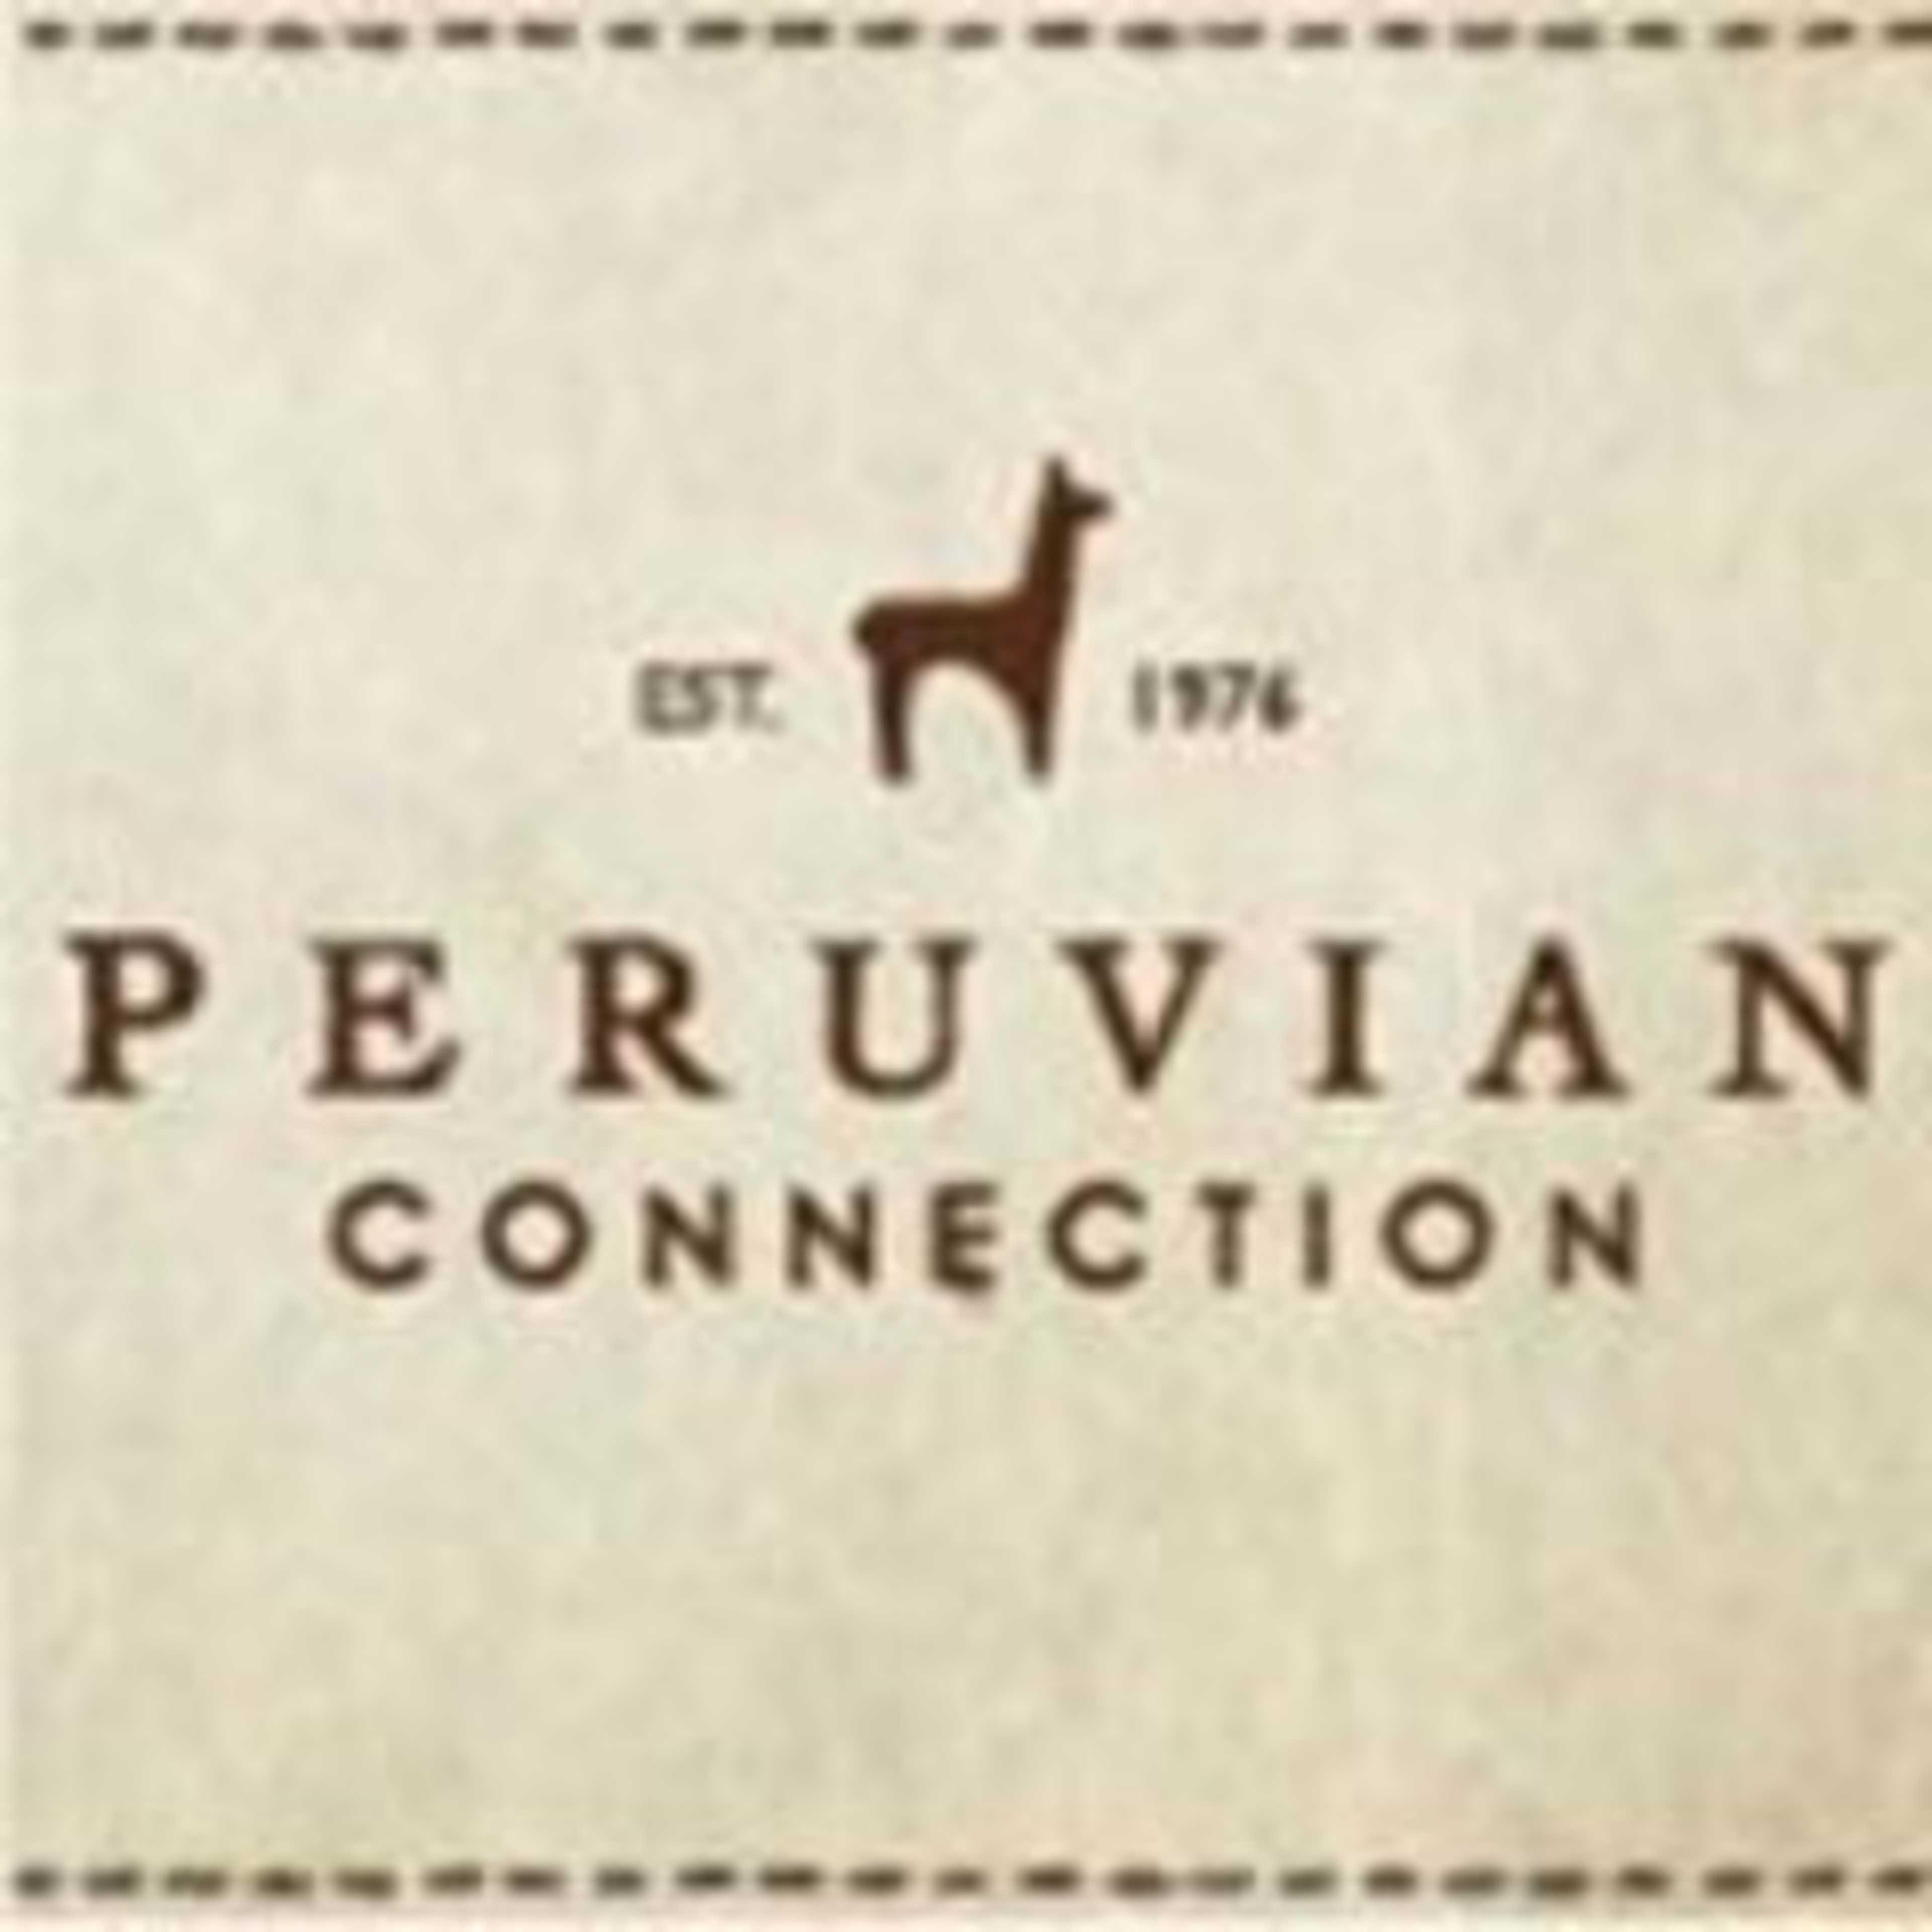 Peruvian ConnectionCode